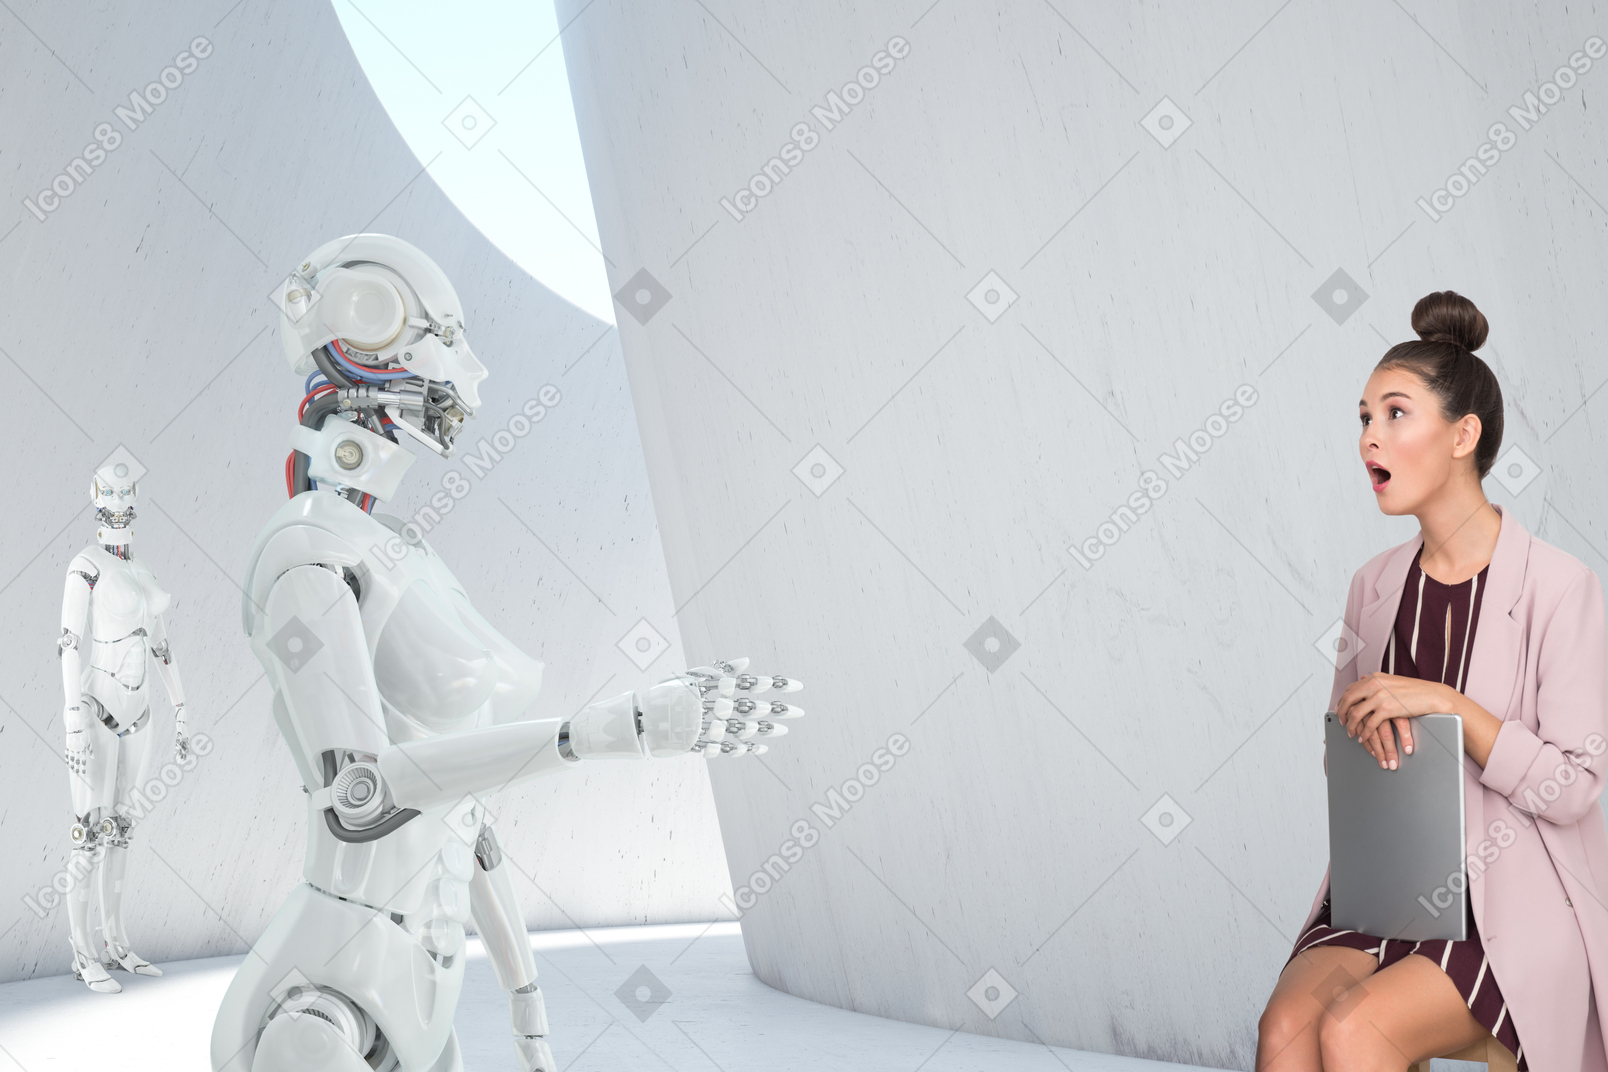 A shocked woman sitting next to a robot